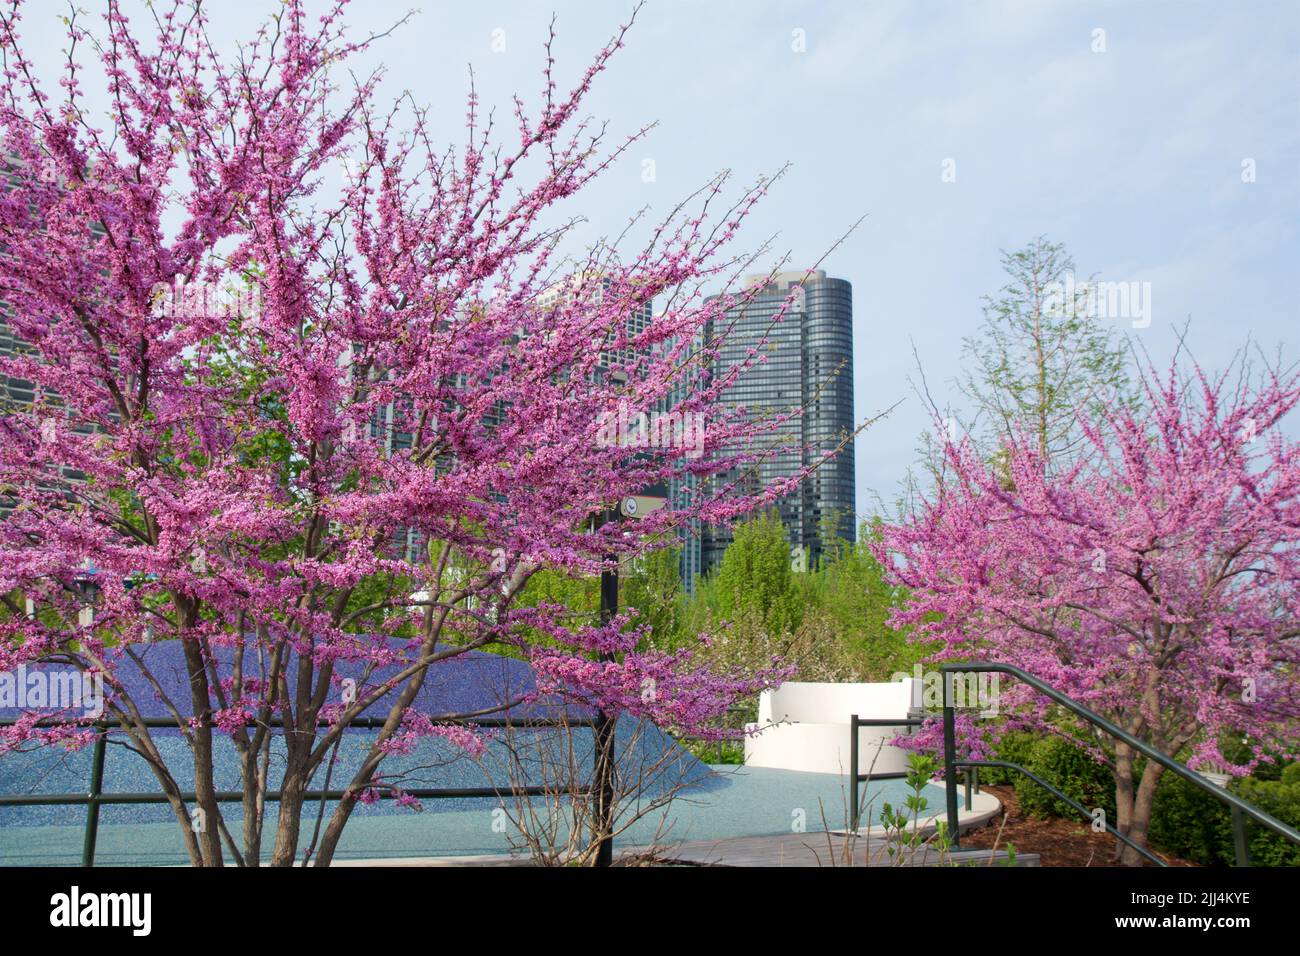 CHICAGO, ILLINOIS, UNITED STATES - May 11, 2018: Pink flowering cherry trees and cherry blossoms at Millennium Park in downtown Chicago Stock Photo